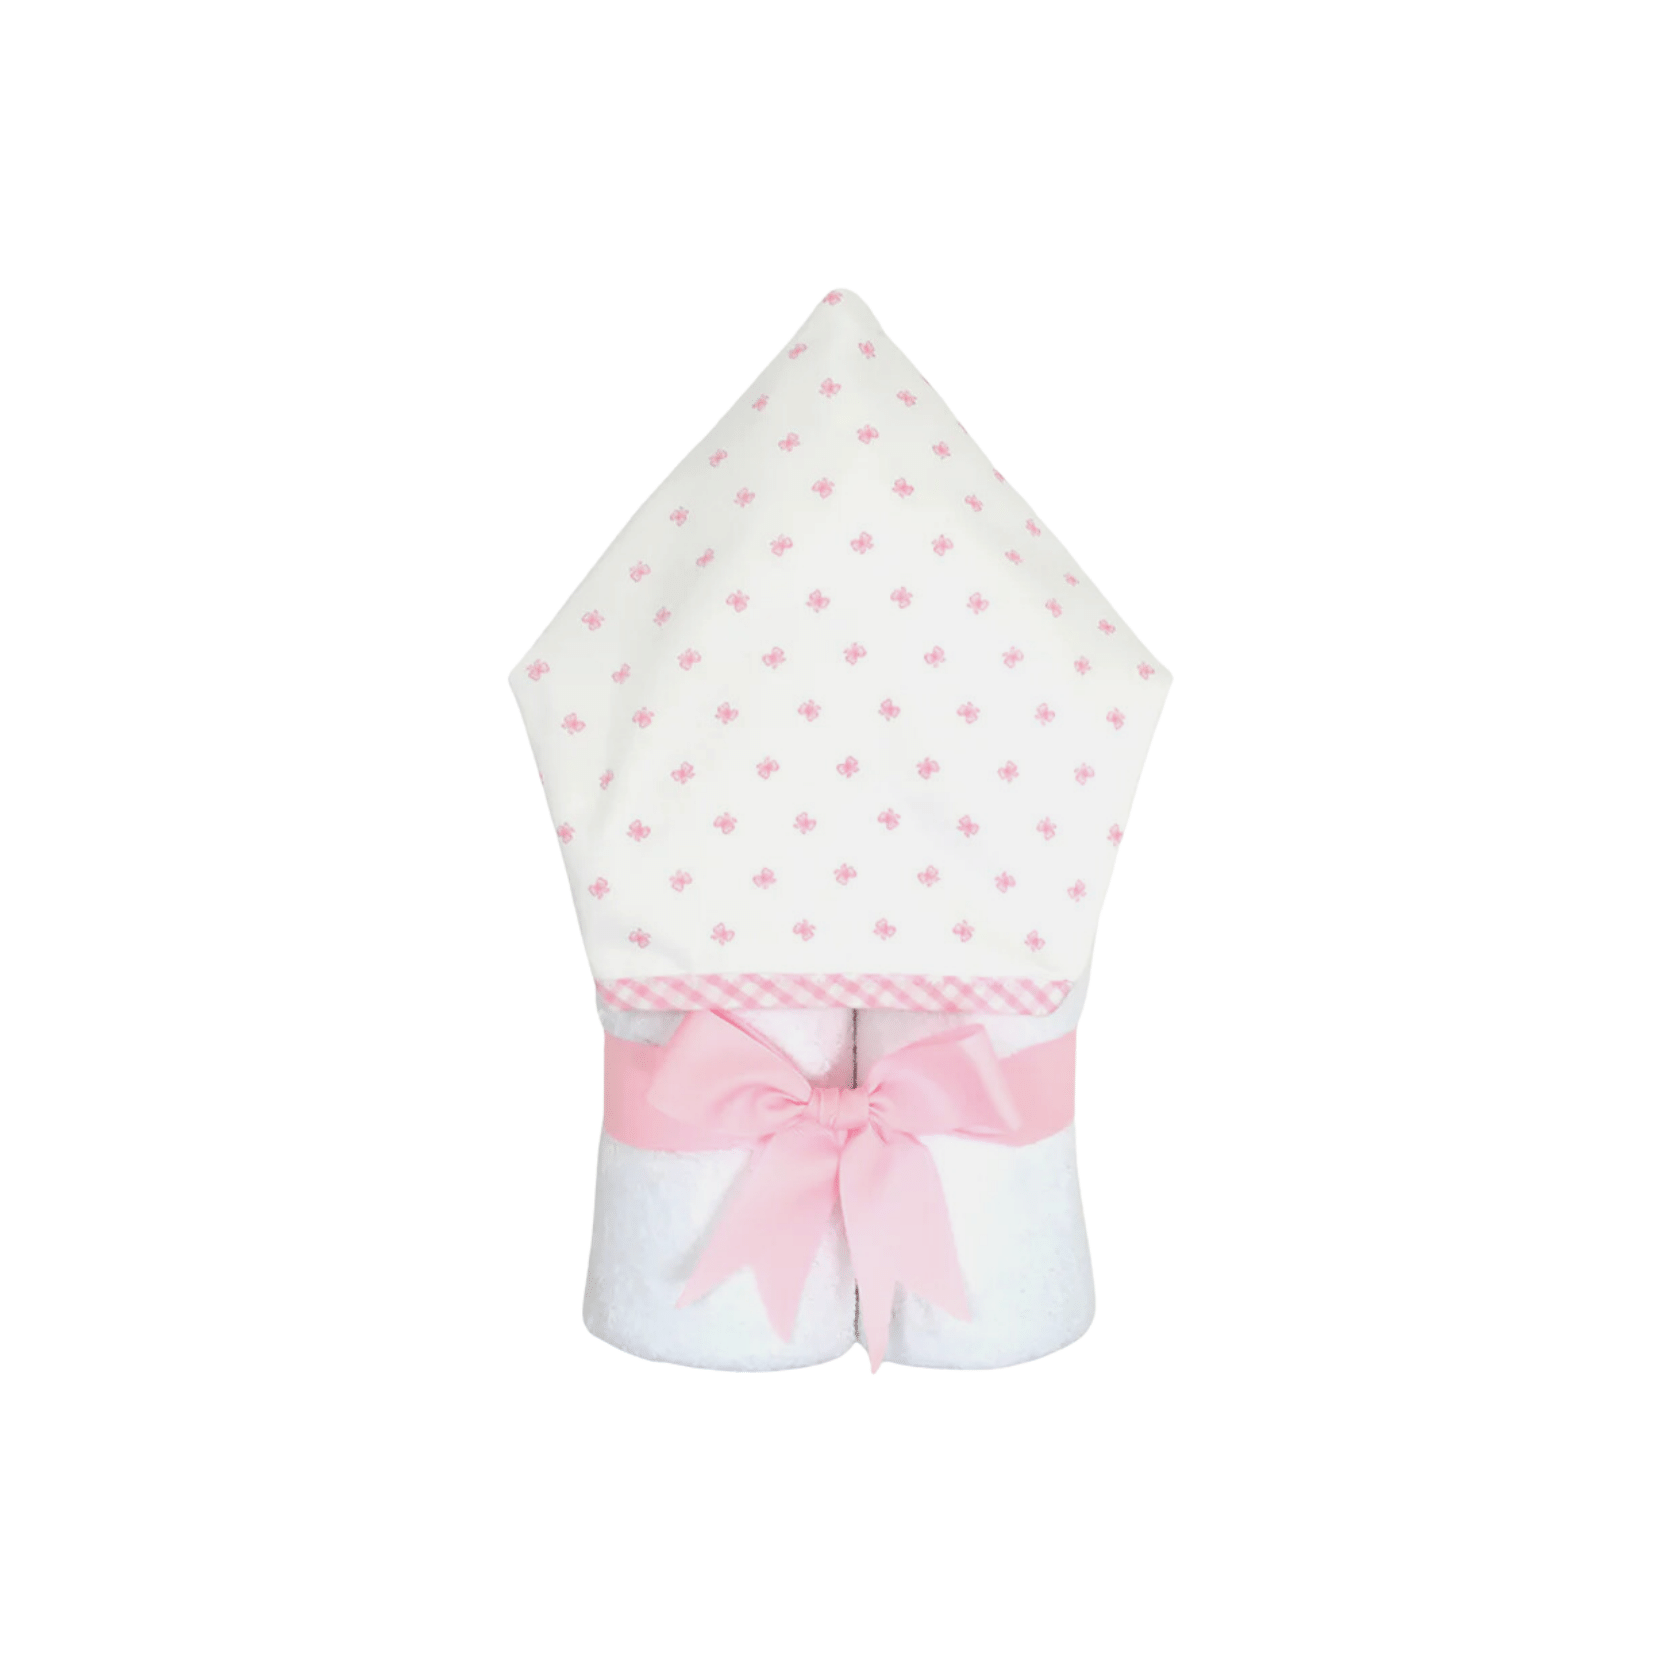 Personalized Baby Girl Pink Bow Print Hooded Towel - Give Wink